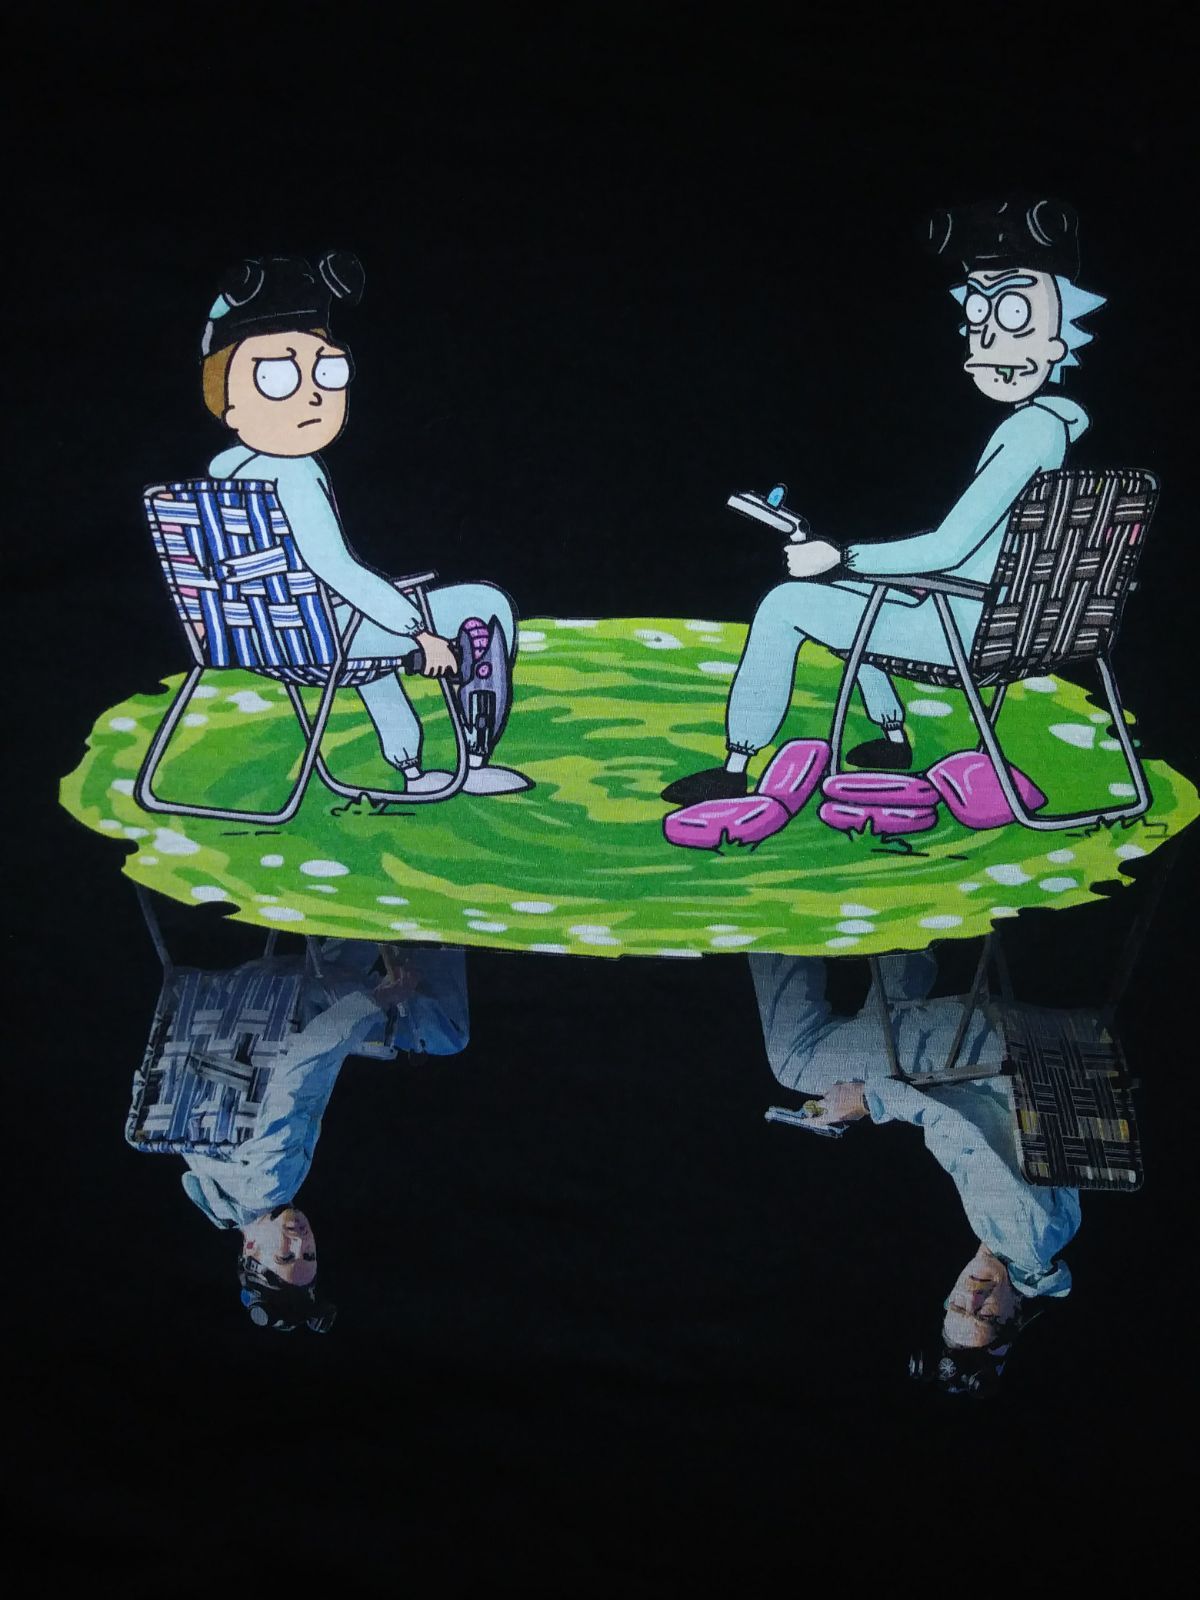 Large Unisex Camping Funny T Shirt. Rick and morty poster, Rick and morty characters, Breaking bad